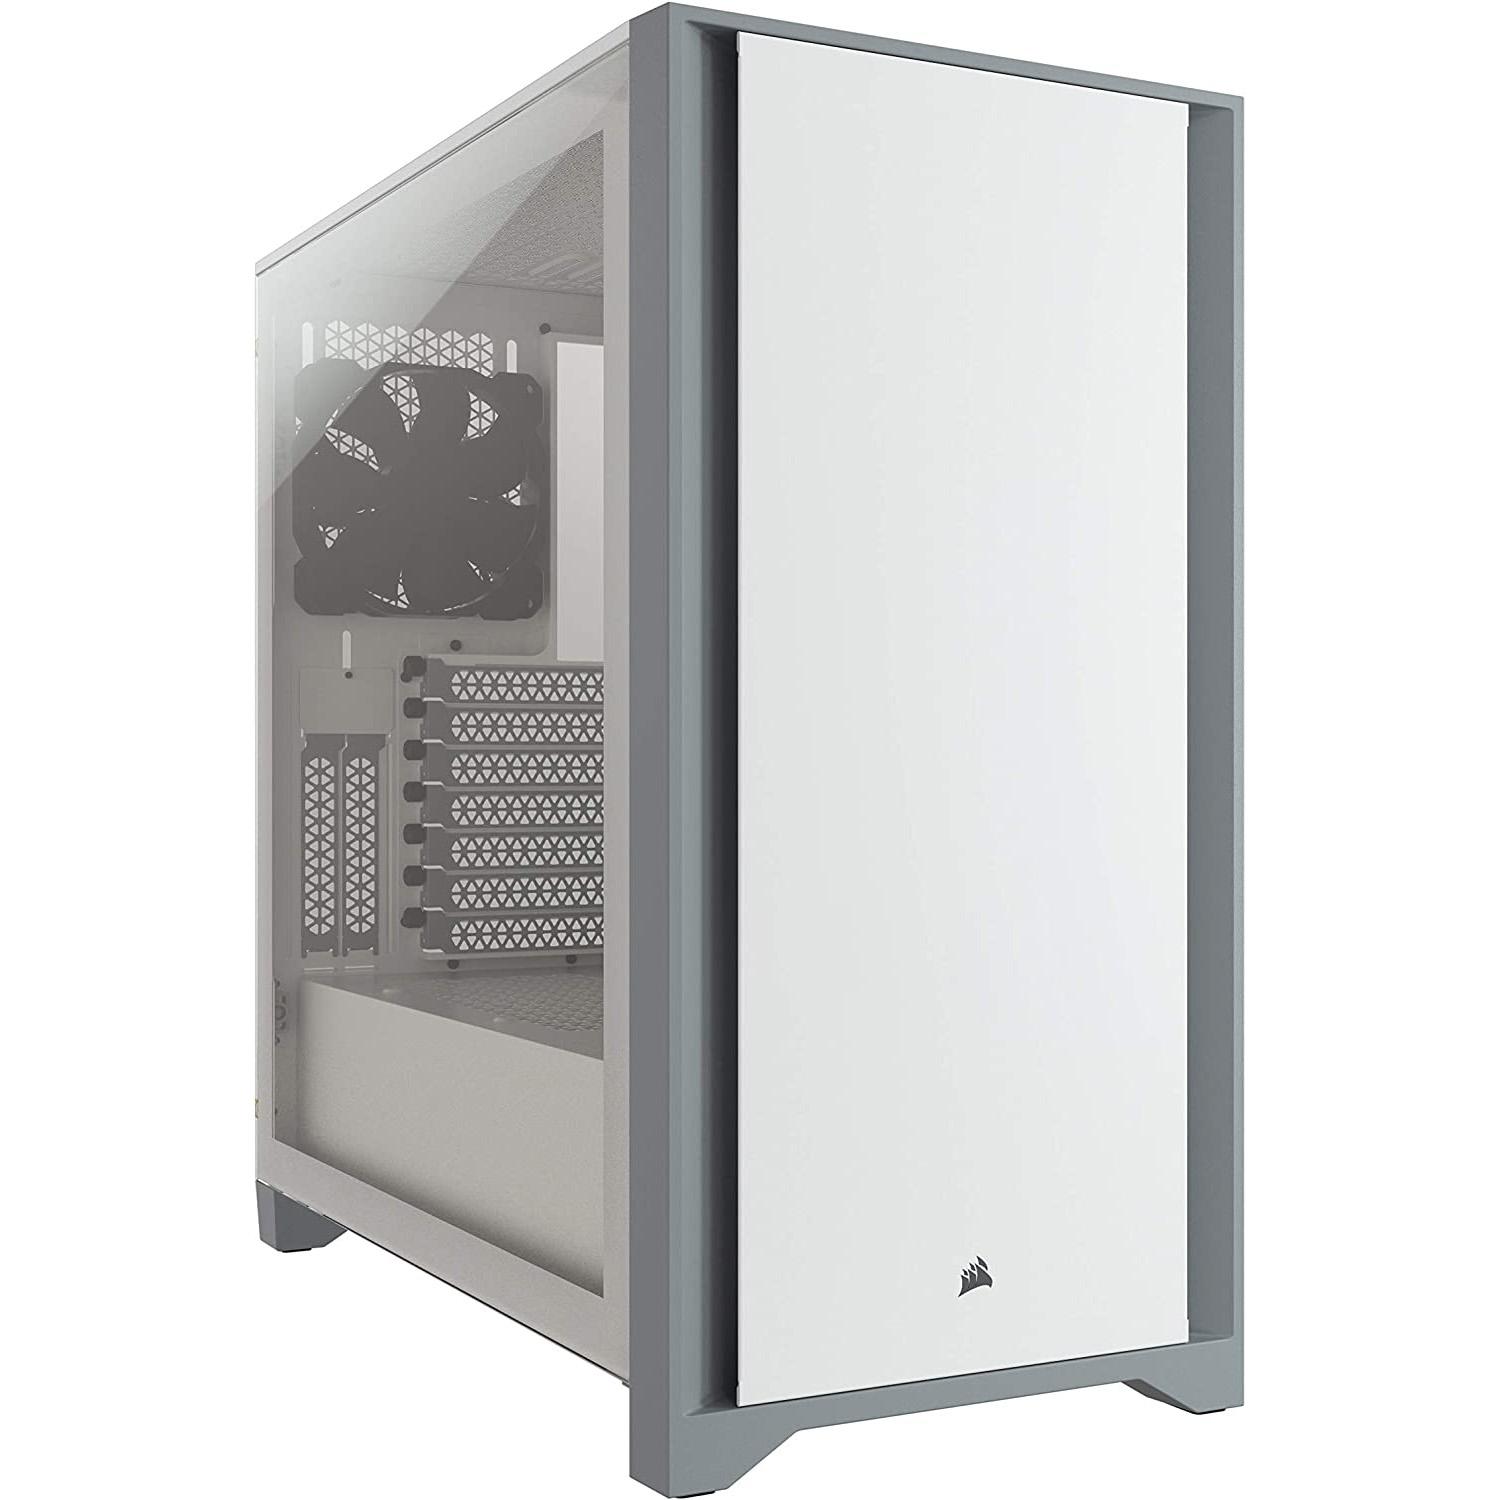 Corsair 4000D Tempered Glass Mid-Tower ATX PC Case for $61.59 Shipped